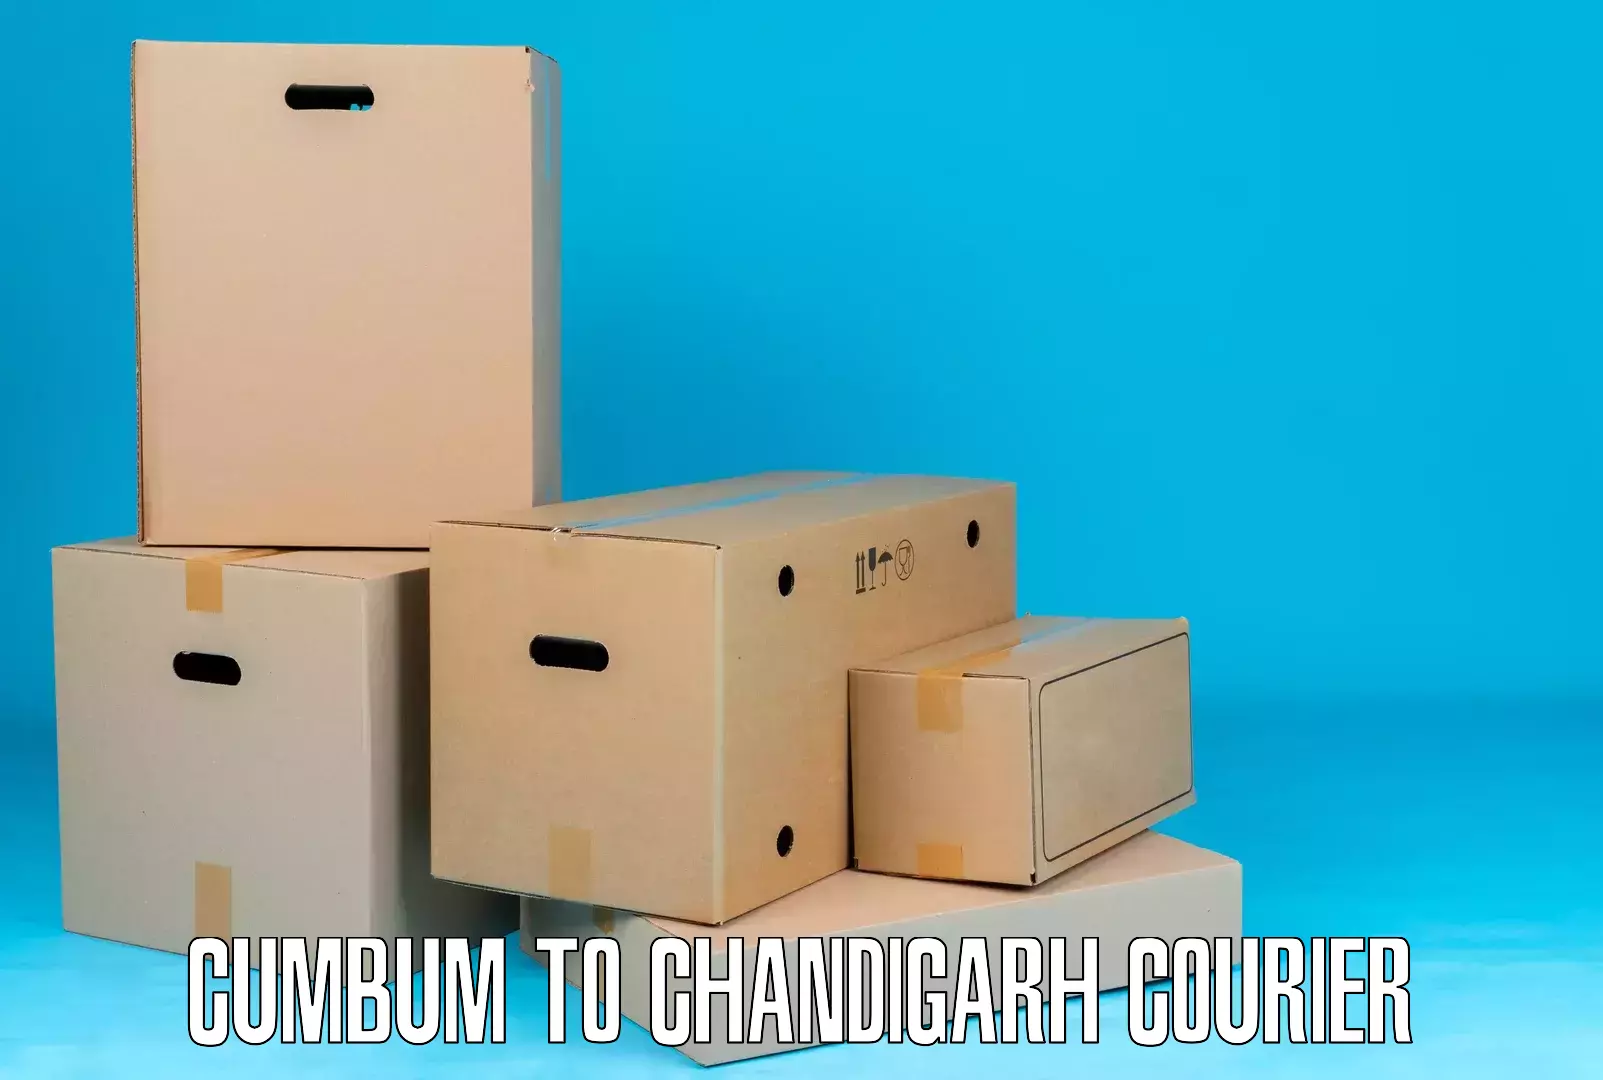 Global shipping solutions Cumbum to Chandigarh